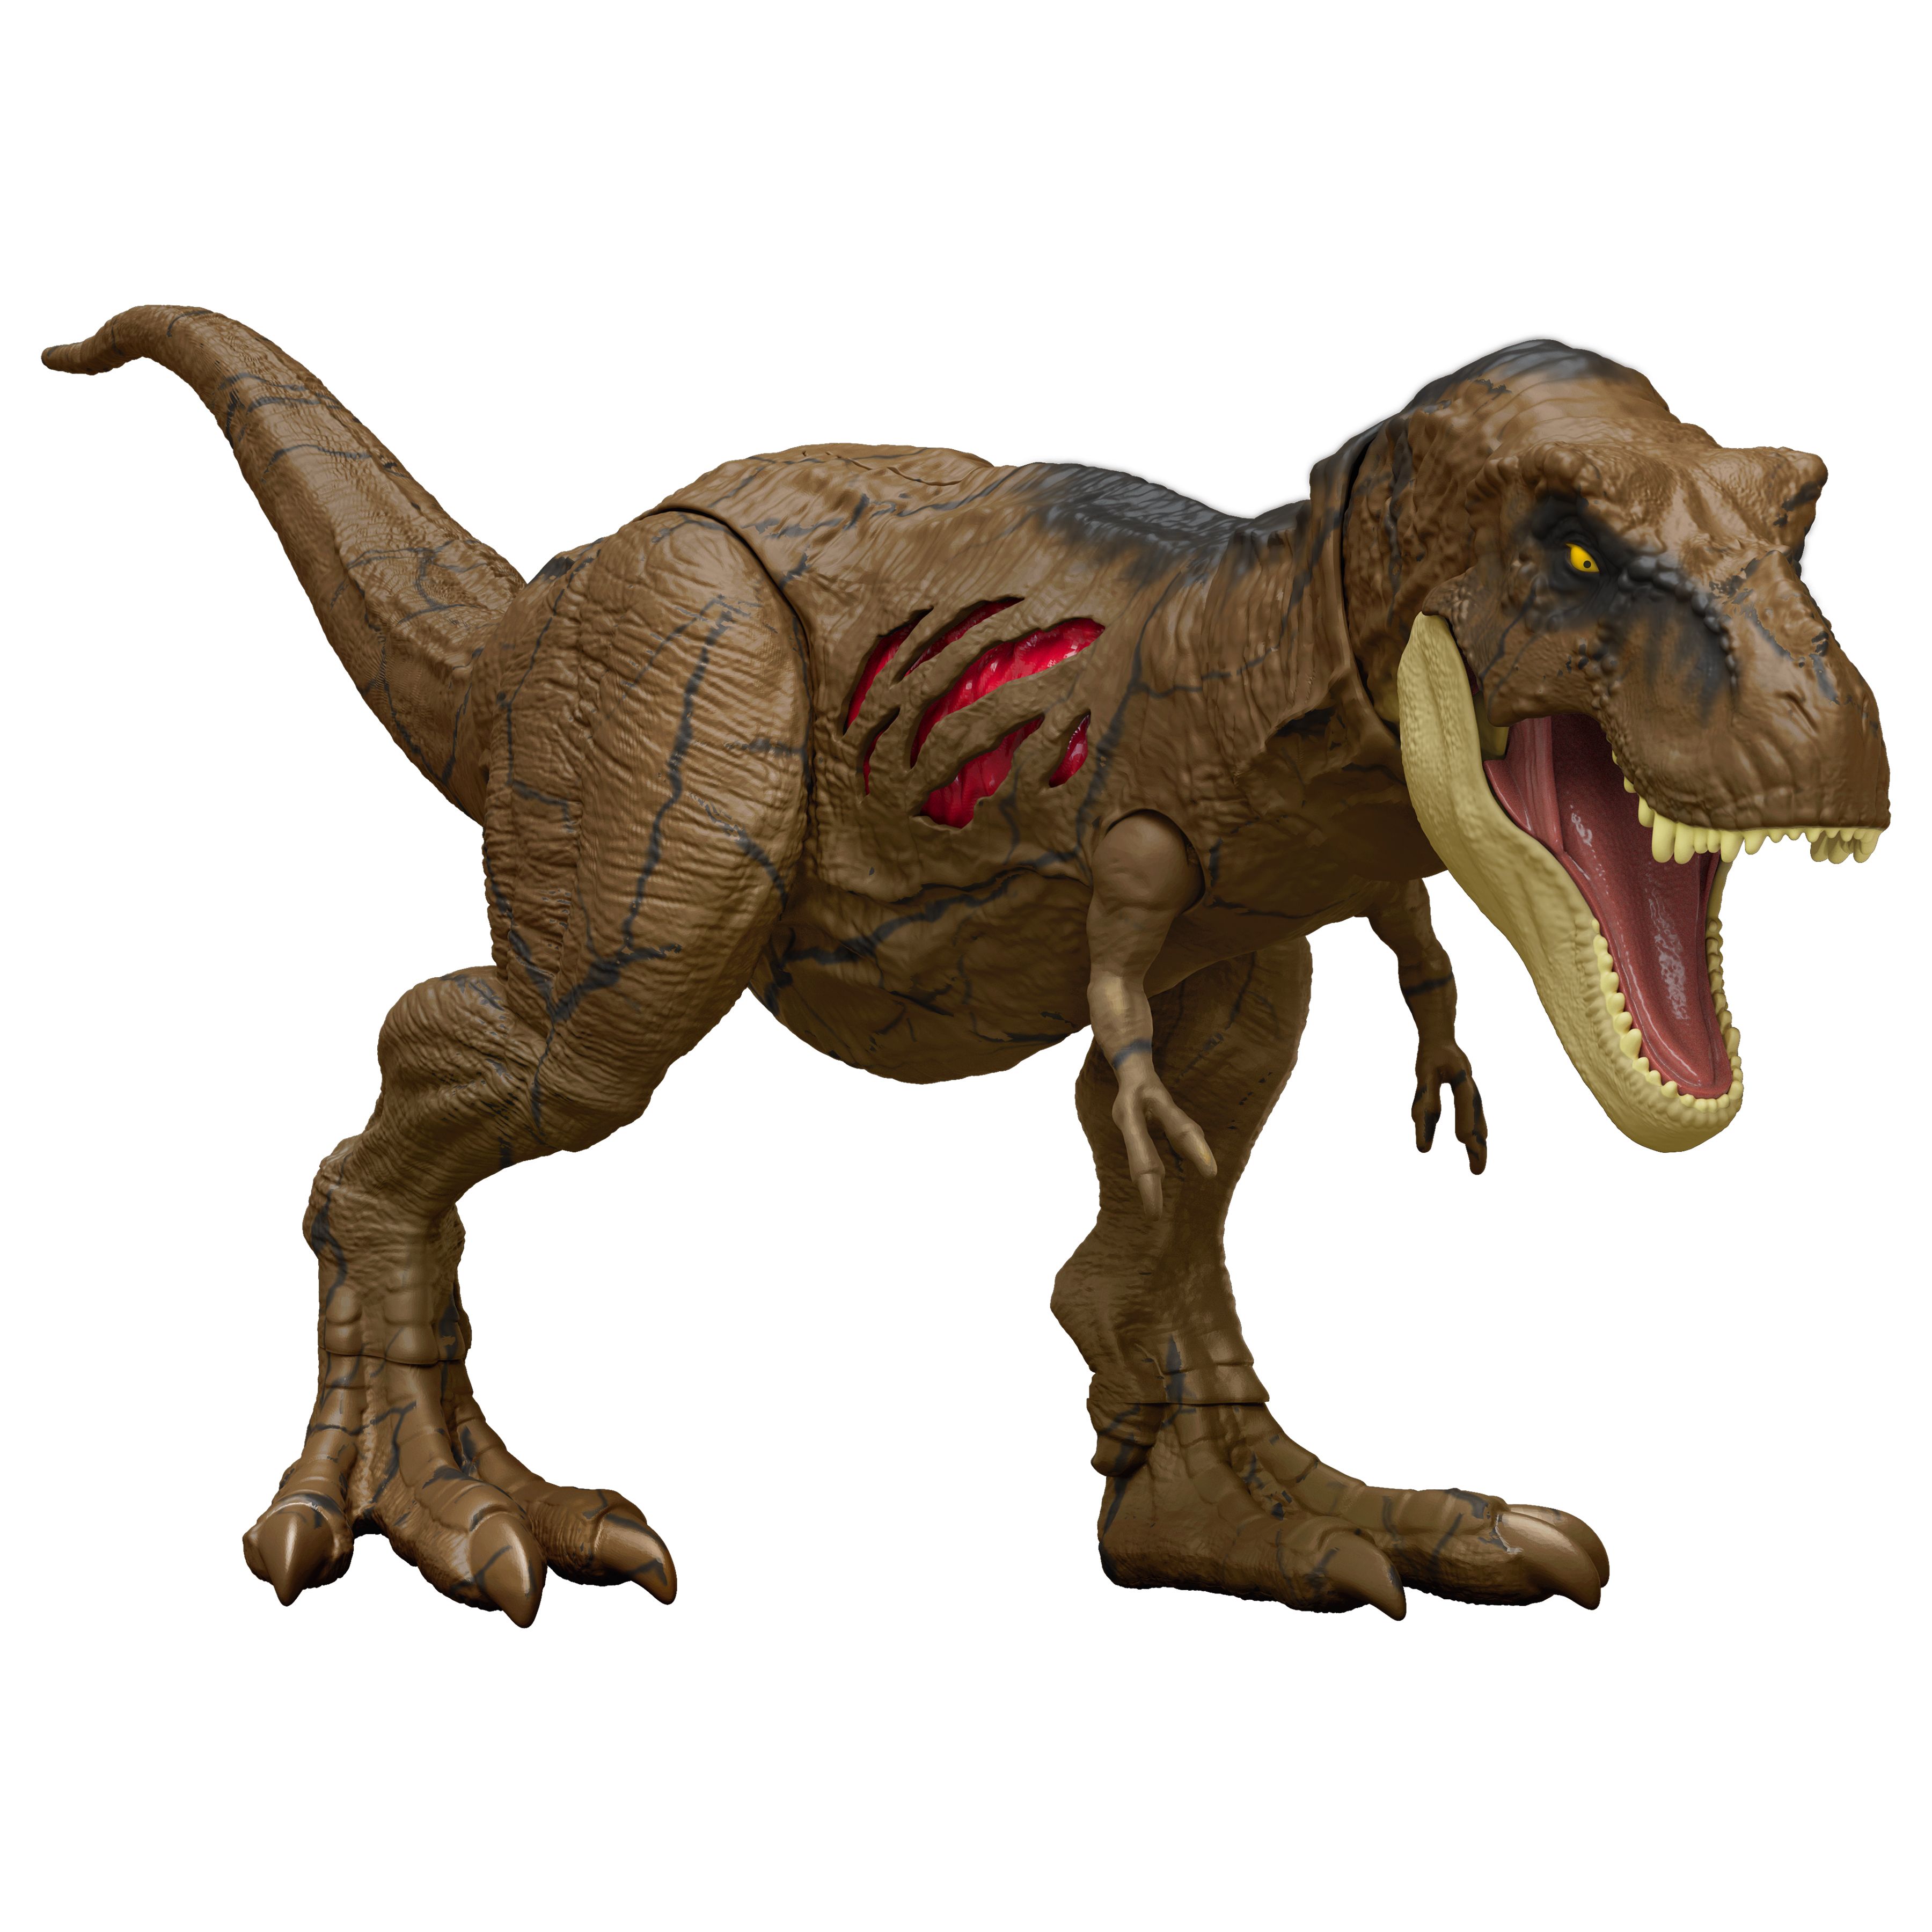 Top dinosaur toys for kids 2021: Jurassic World, Toy Story and more